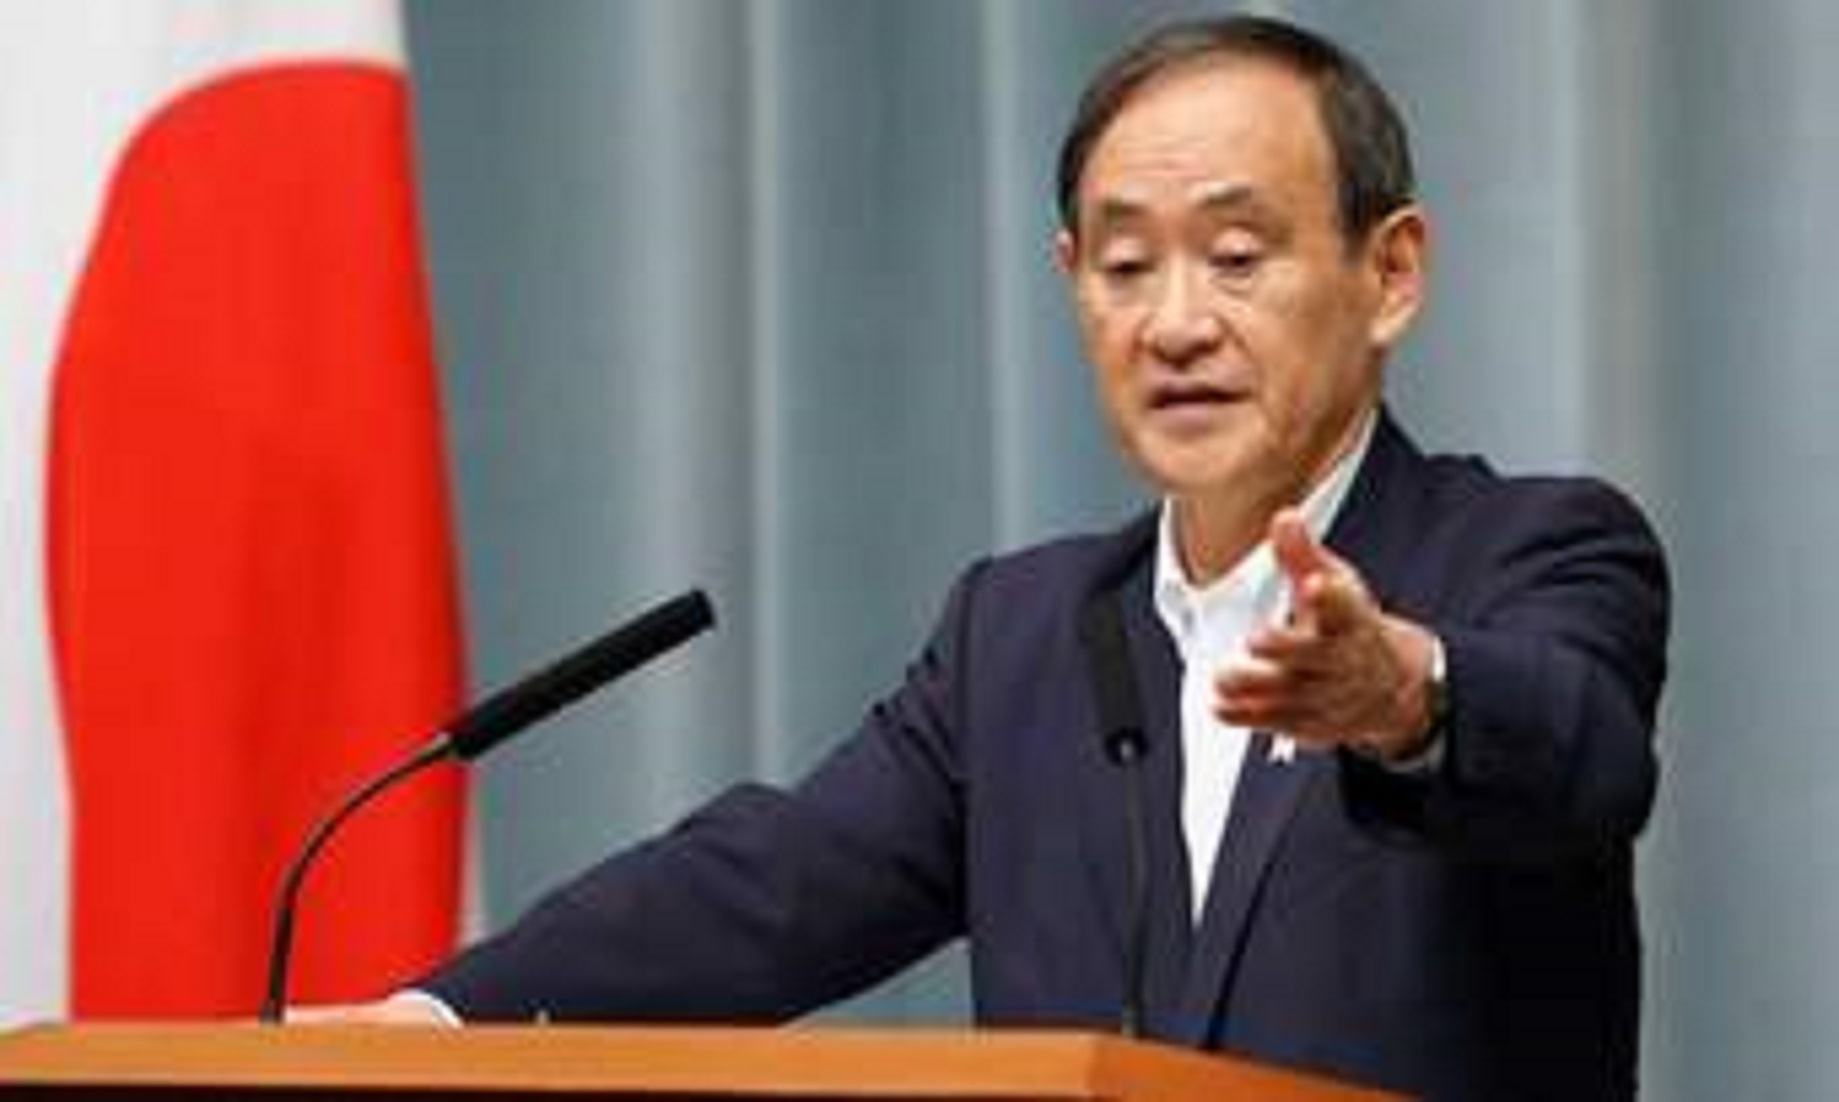 Japan’s Suga Vows To Go Ahead With Olympics, Curb COVID-19 Resurgence In Policy Speech